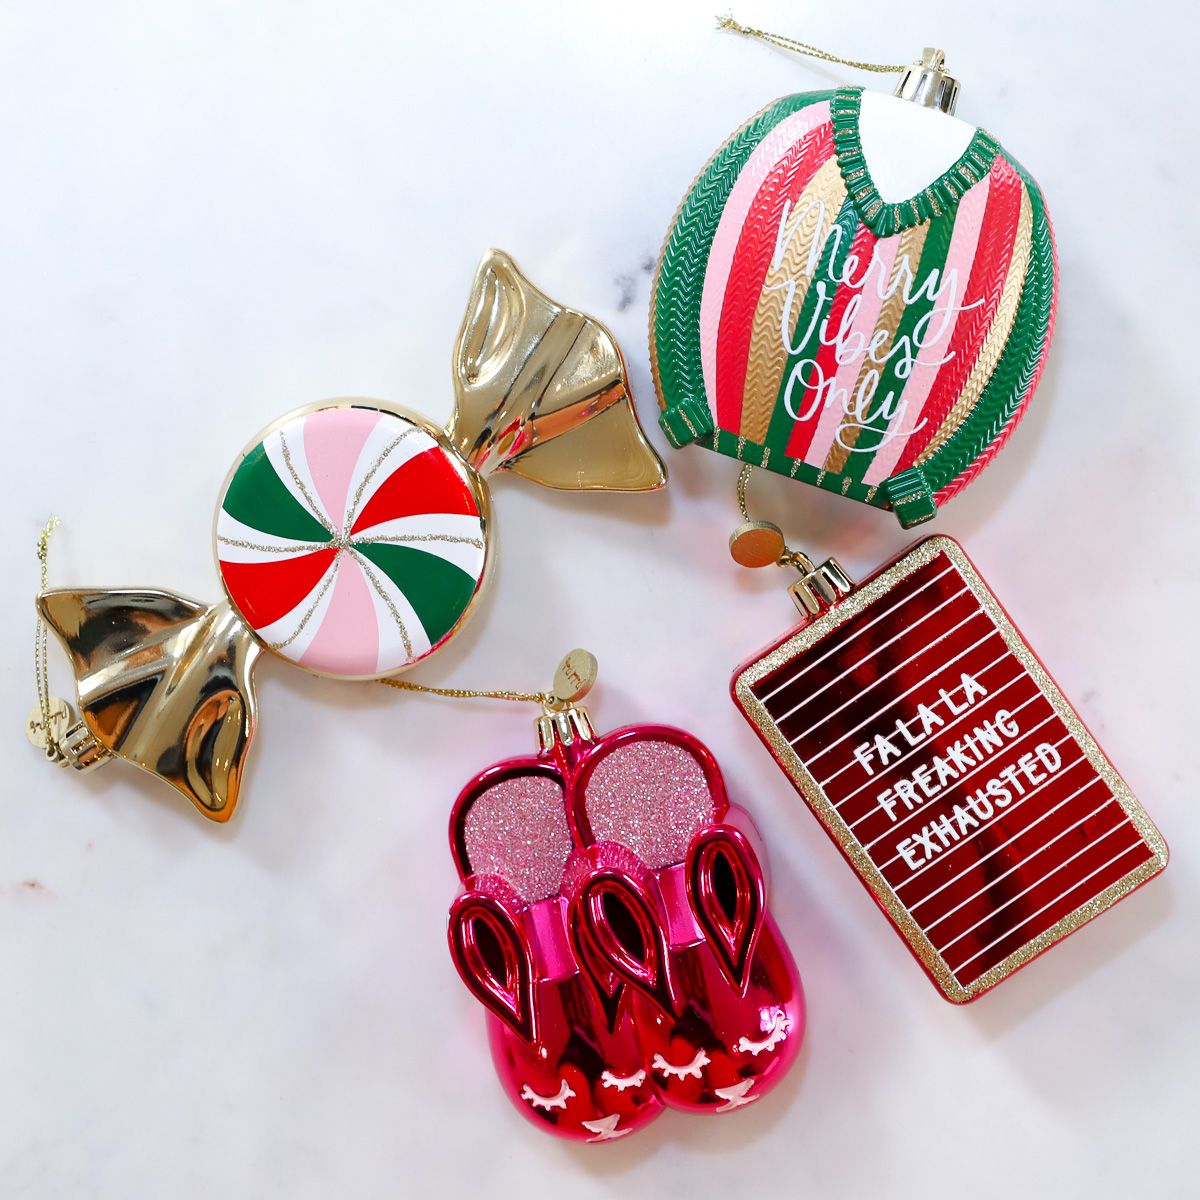 Packed Party 4pc Classic Candy Striated Sweater Slipper Assorted Novelty Ornament Set - image 4 of 5